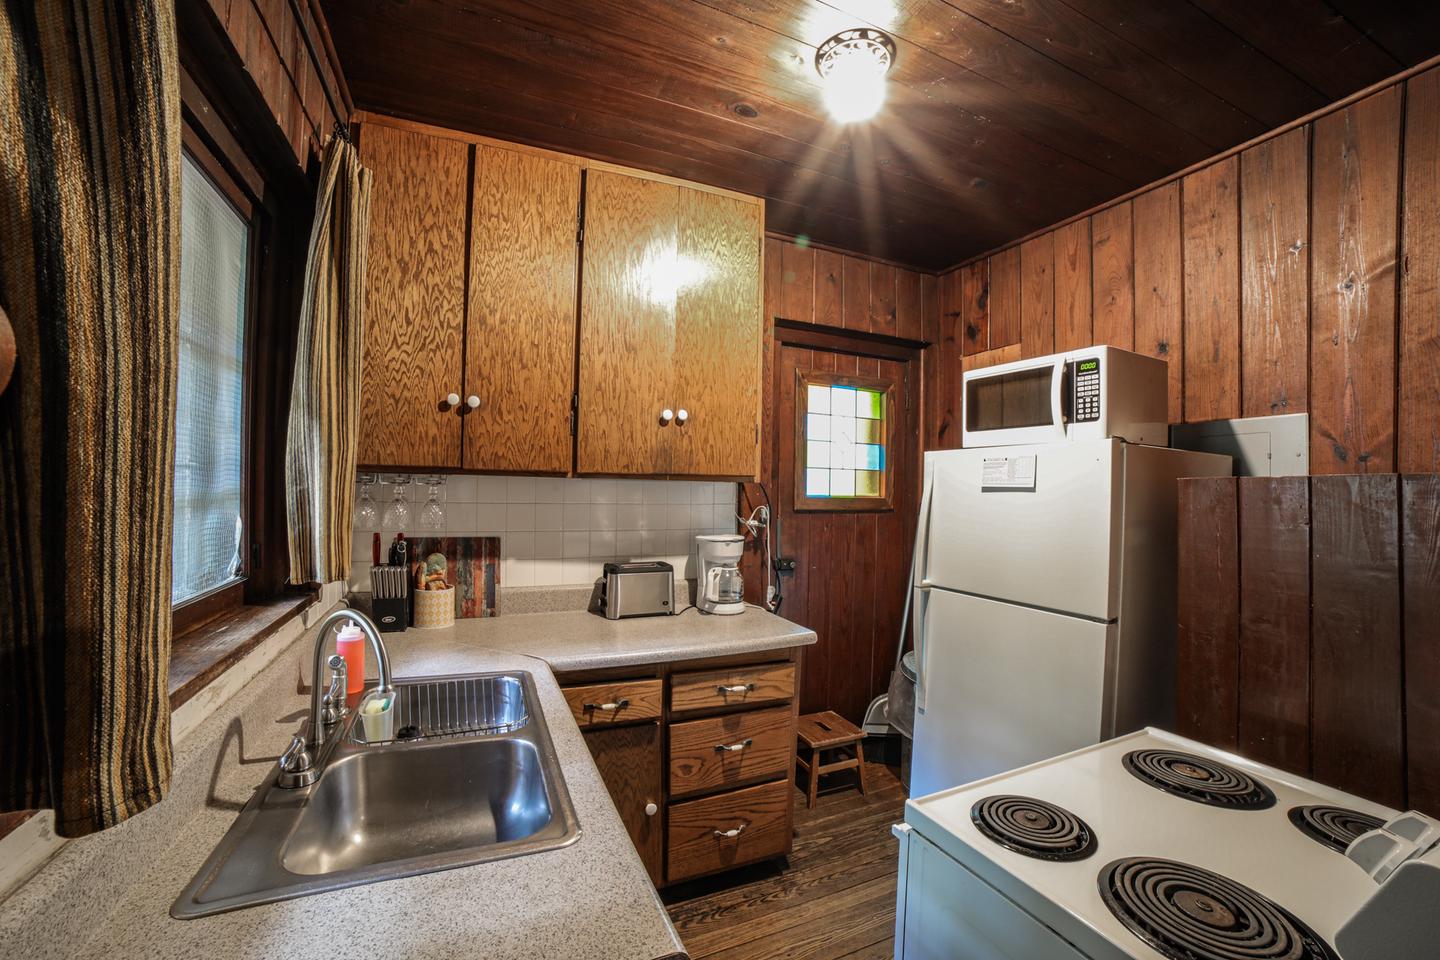 White Rock Mountain, Cabin A KitchenCabin A kitchen features new appliances, including an electric stove, refrigerator, microwave, toaster, coffee pot, crock pot, cooking utensils, pots & pans, vintage dishes, and much more!